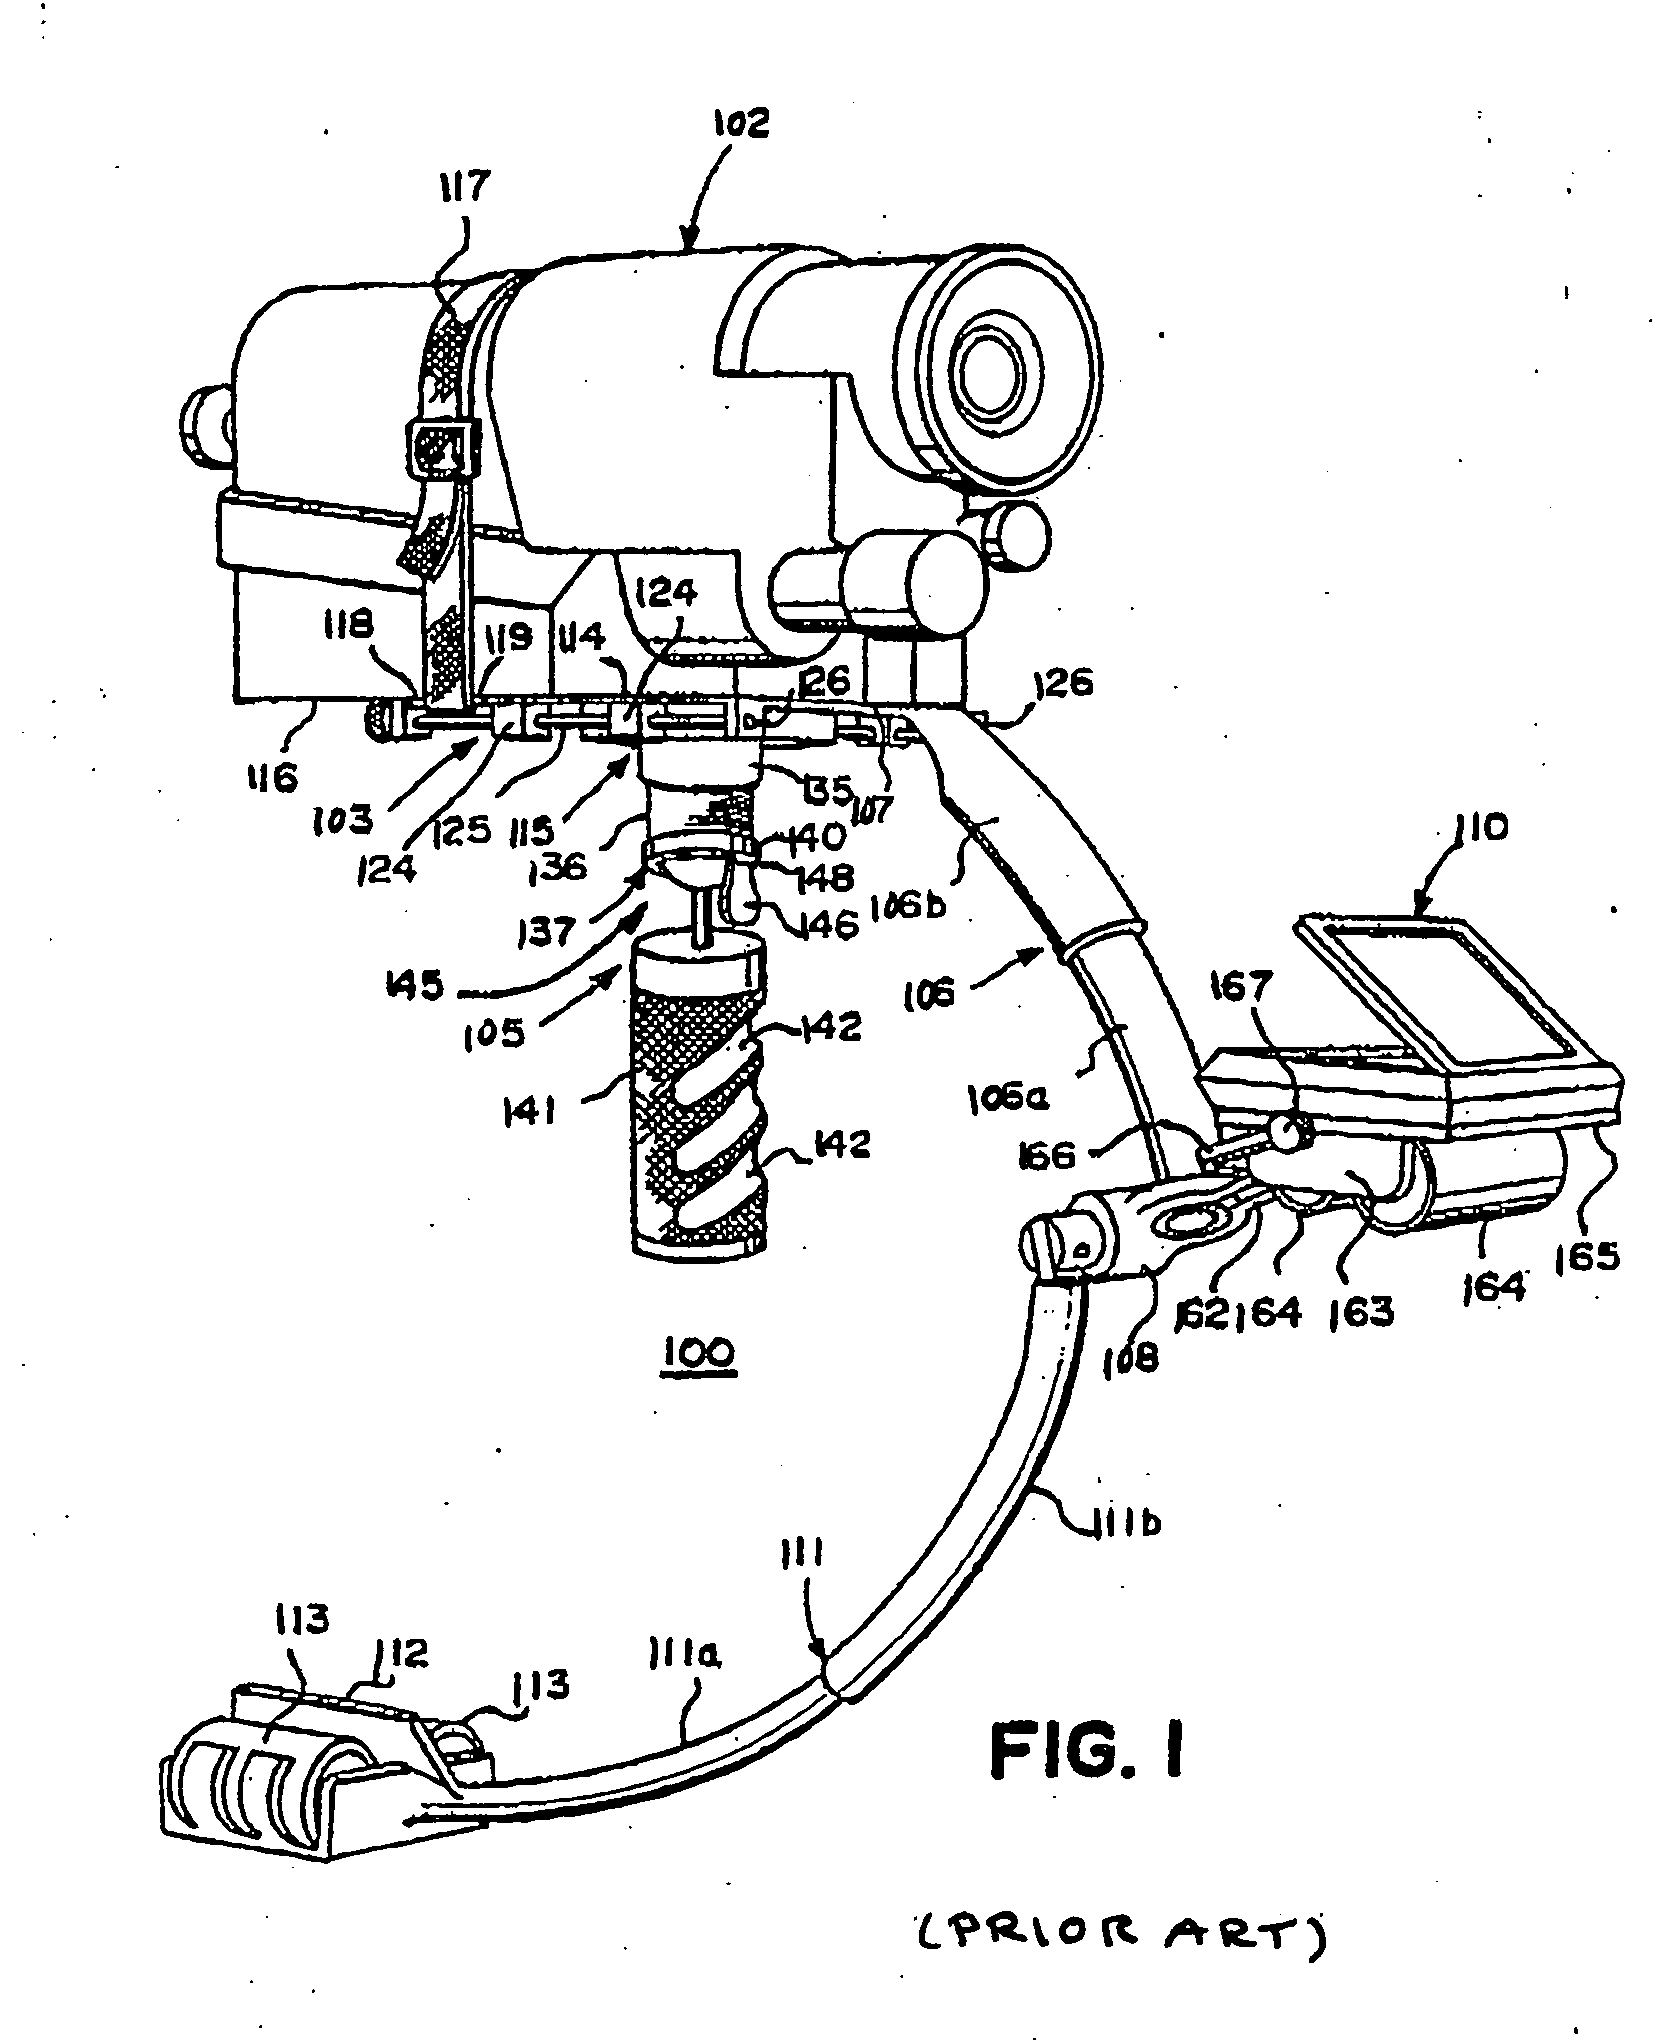 Folding and adjusting hinge for stabilized equipment support